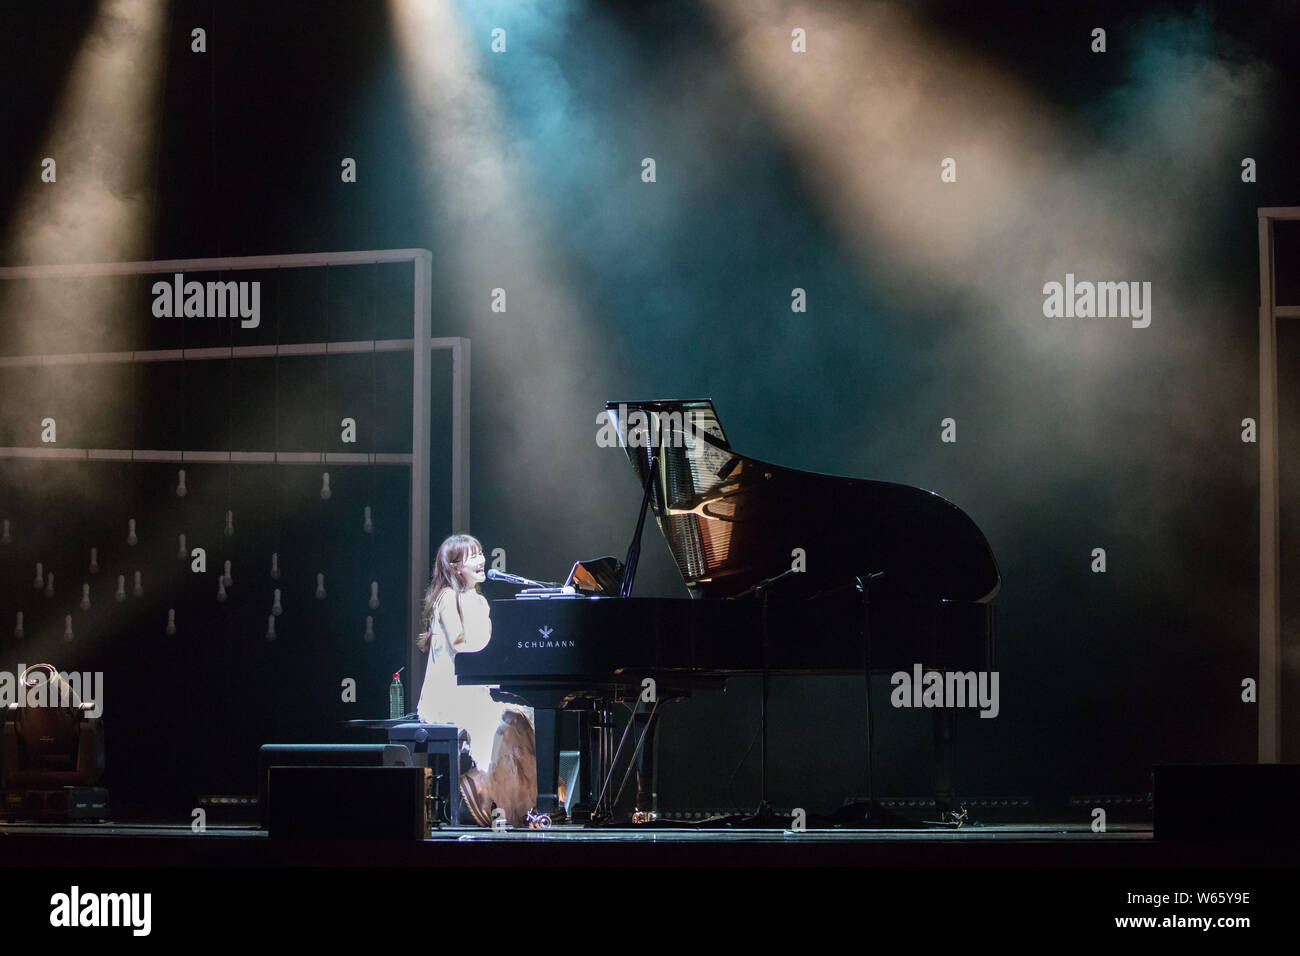 Japanese singer Ai Otsuka performs during a concert in Guangzhou city, south China's Guangdong province, 19 August 2018. Stock Photo